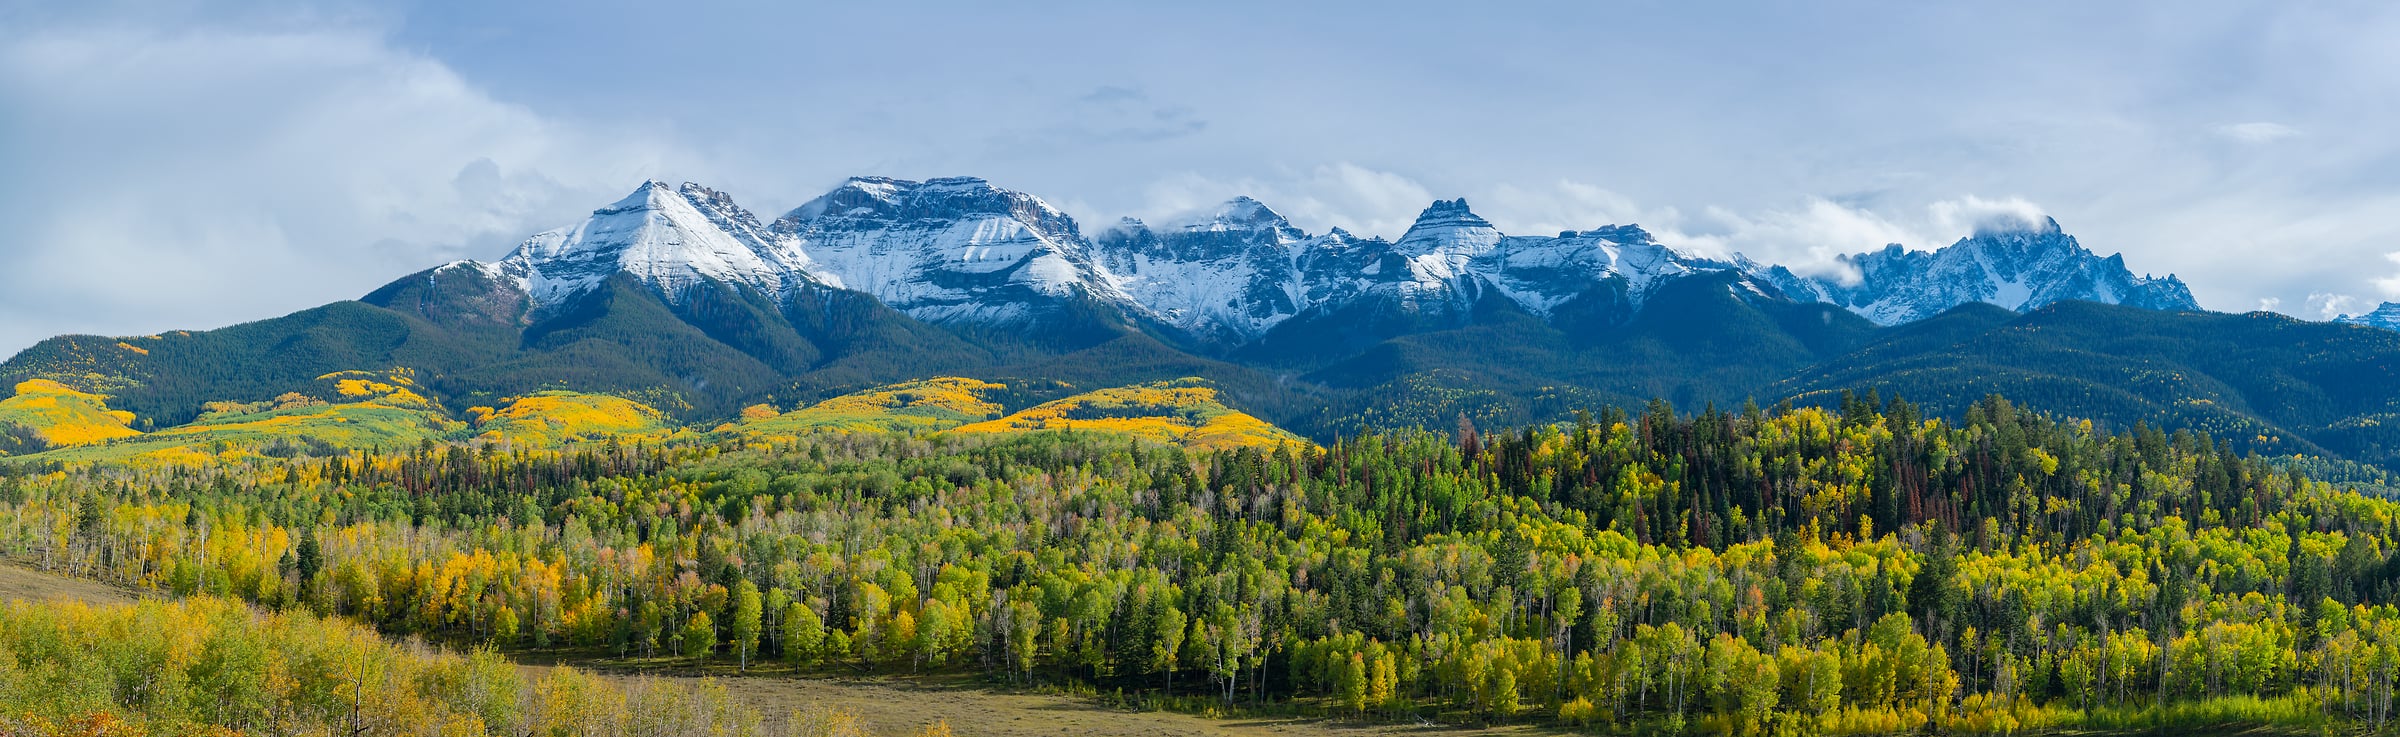 474 megapixels! A mountain landscape decor print from VAST; photograph created by Greg Probst in Uncompahgre National Forest, Colorado.